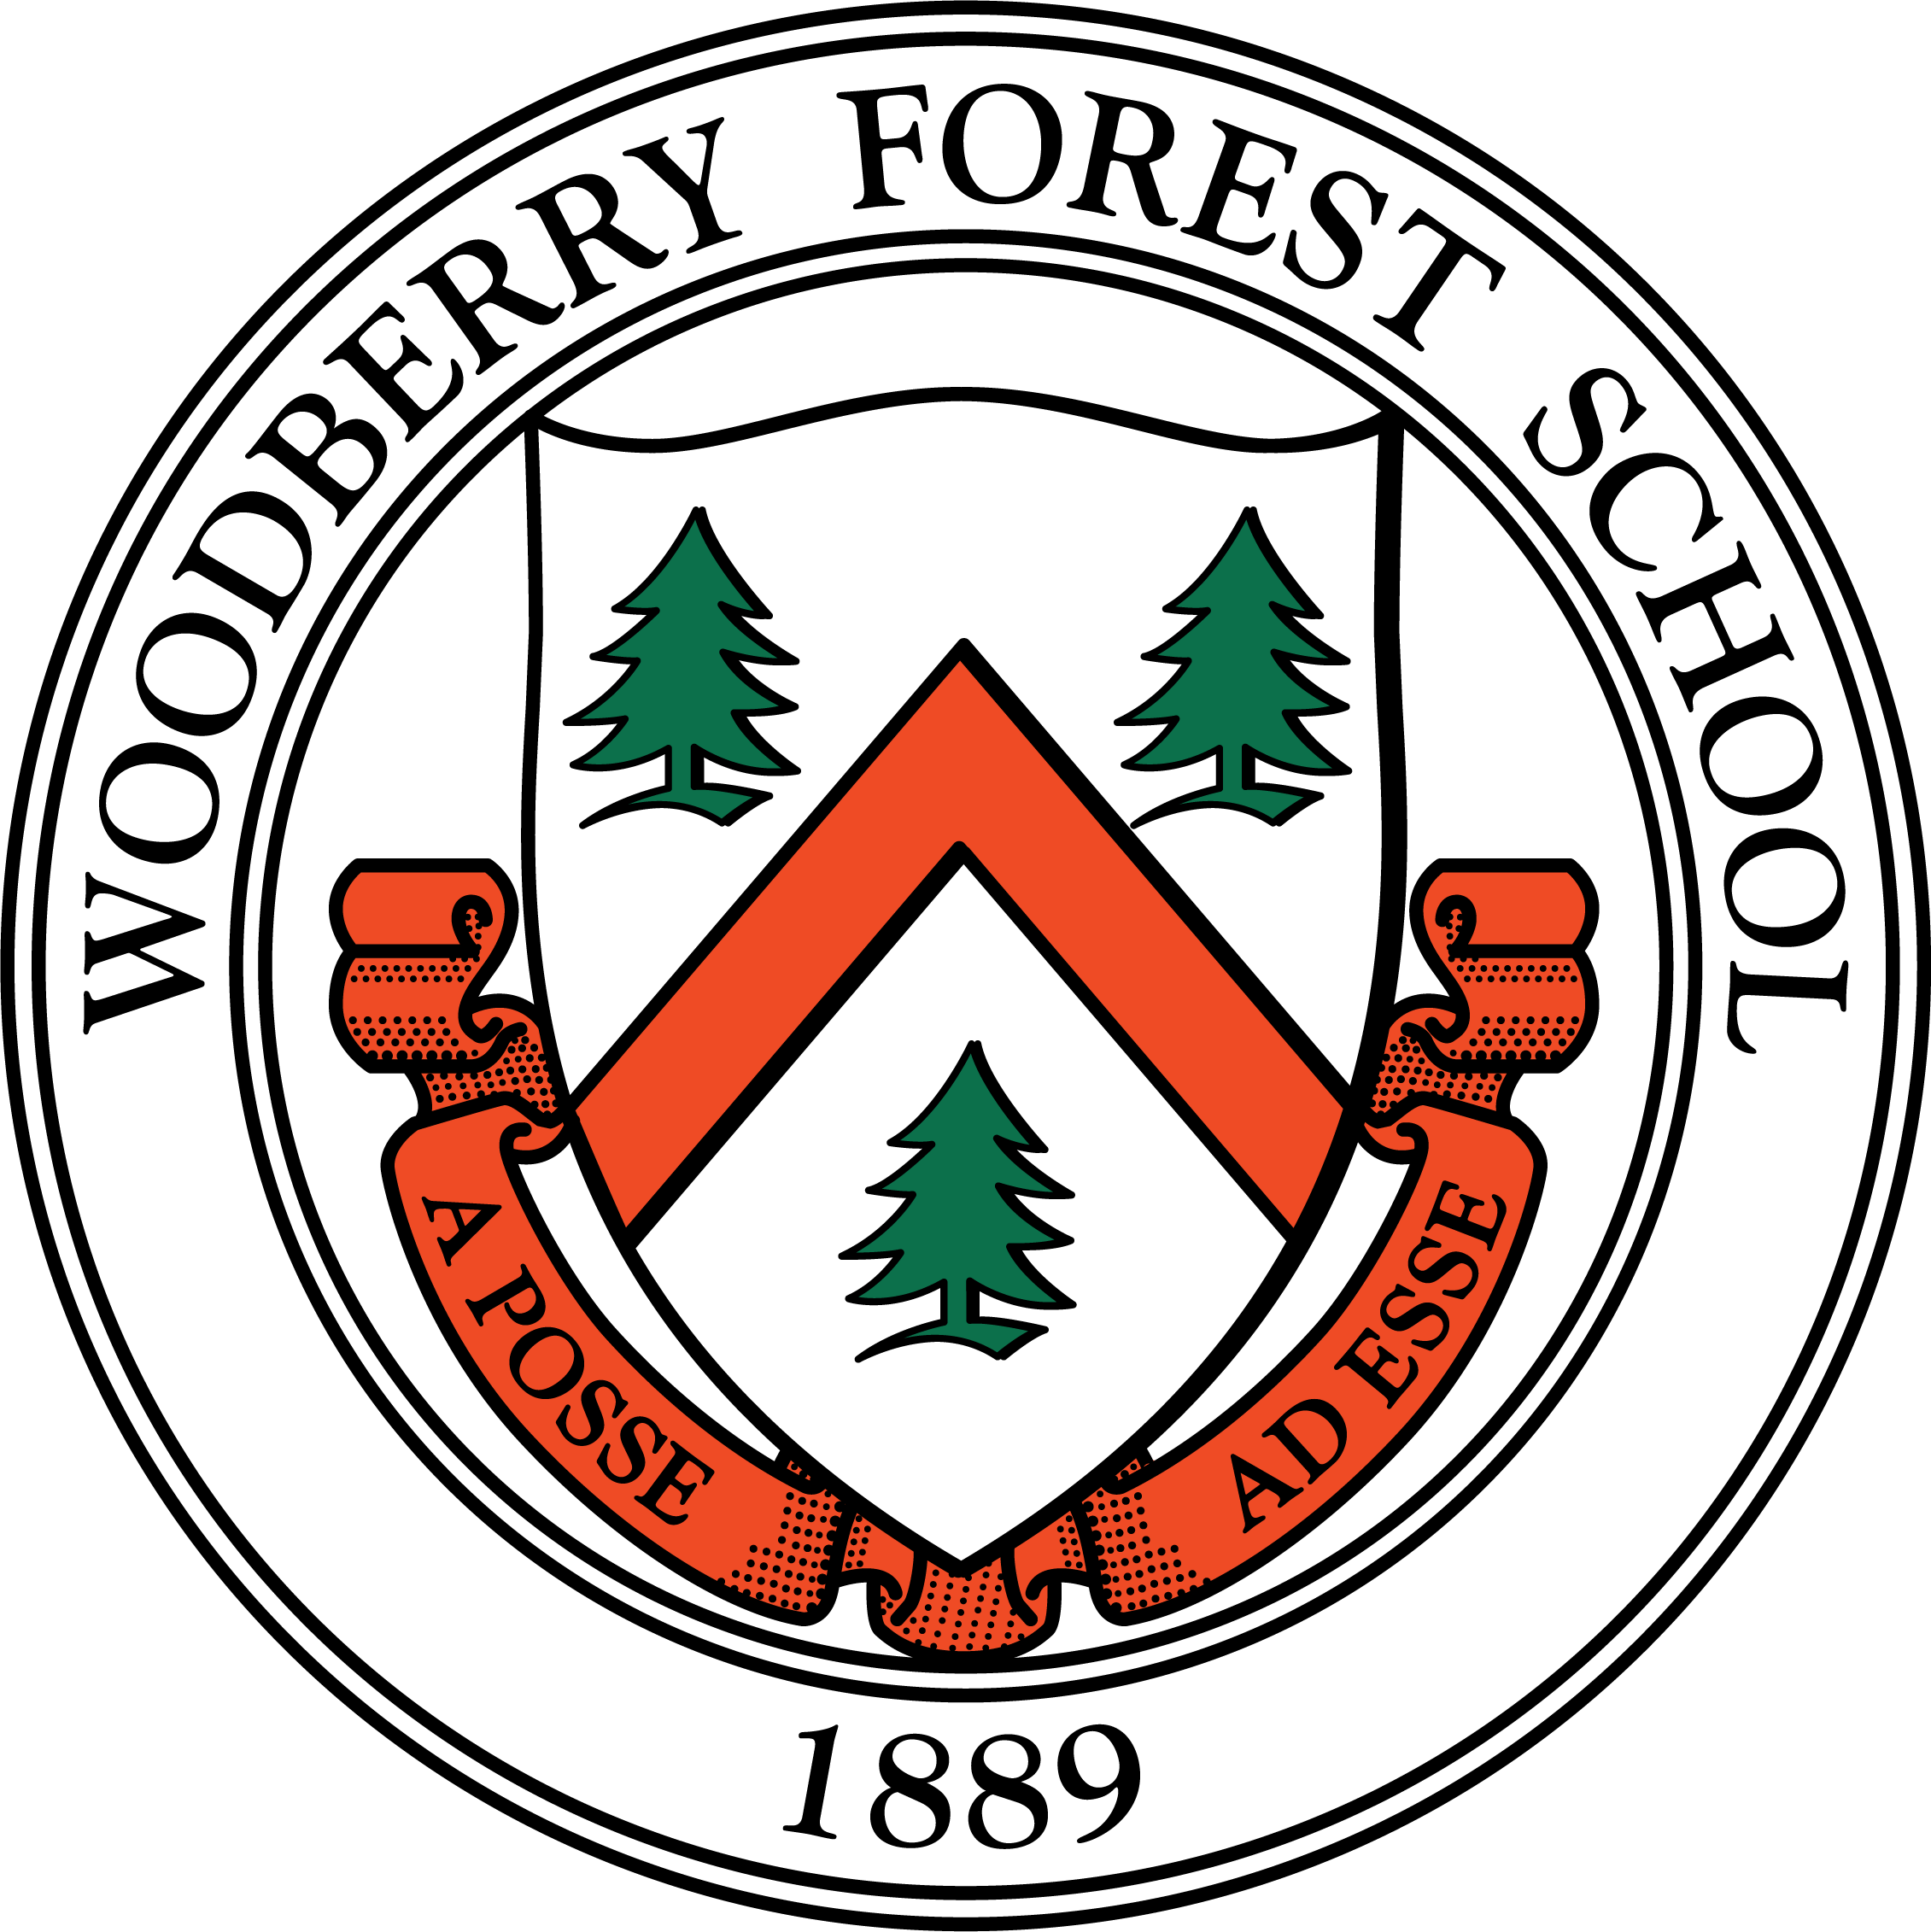 Woodberry Forest School